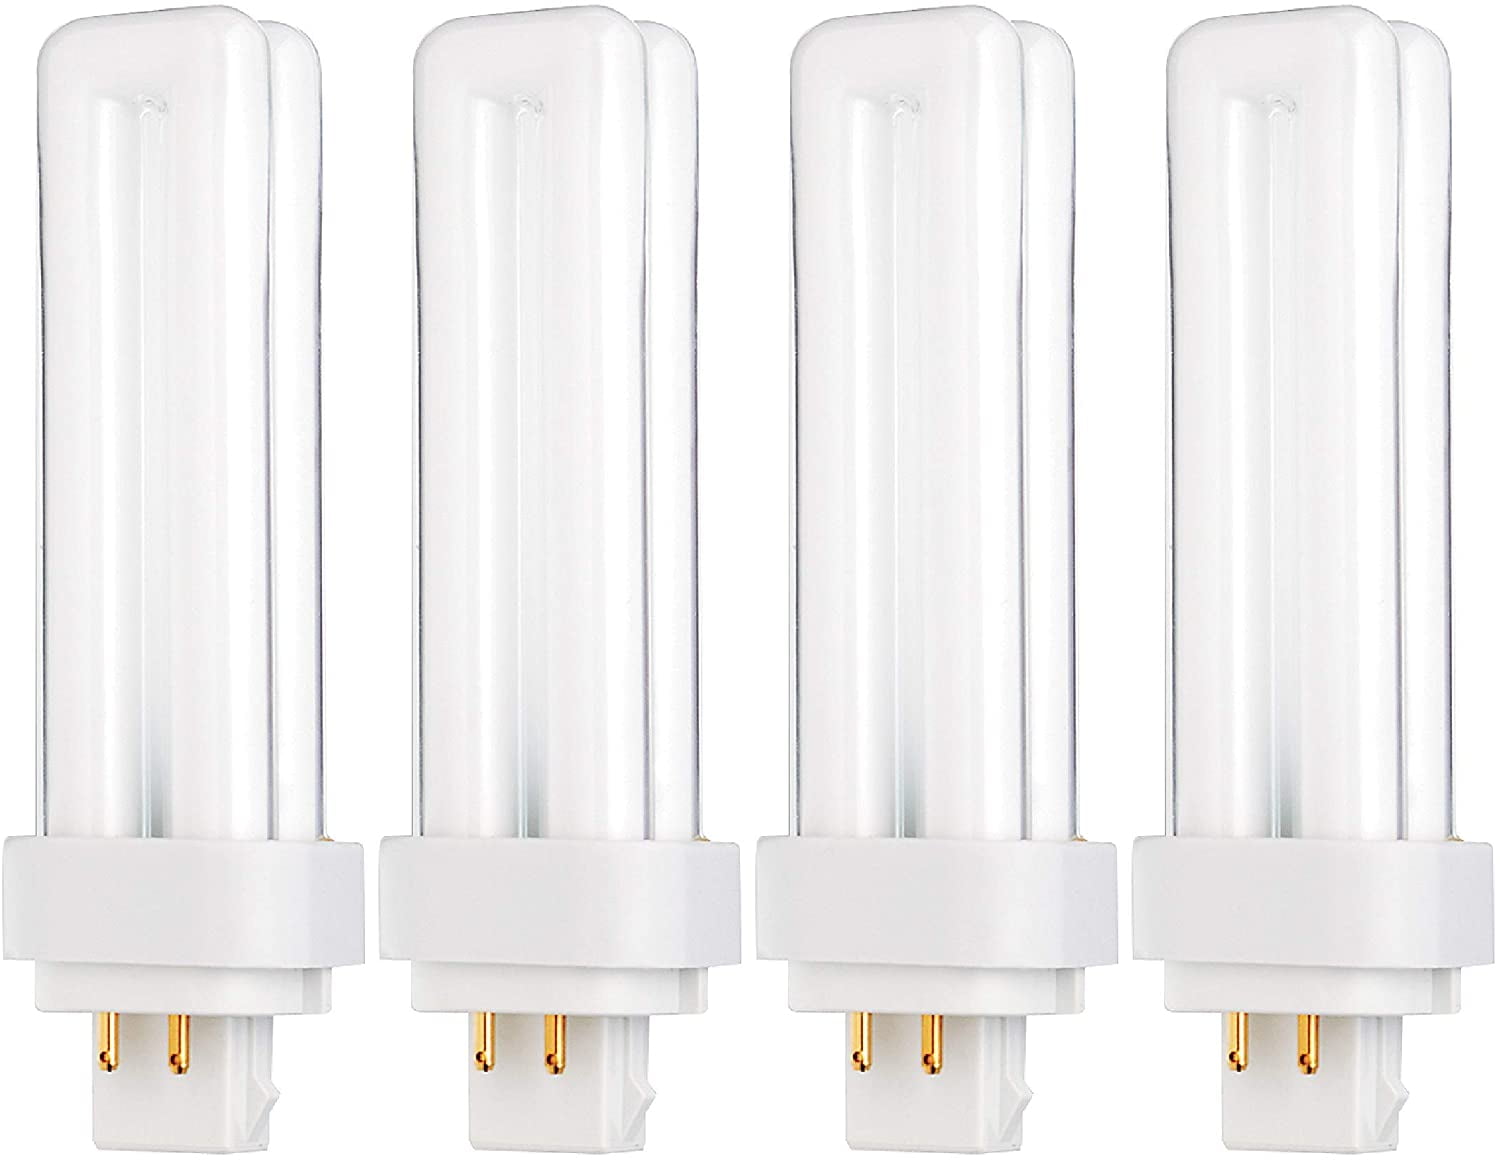 PLC-13W 827 4 Pin G24q-1 Replaces Philips 38325-7 and Sylvania 20682 Compact Fluorescent Light Bulb 8 Pack 13 Watt Double Tube 